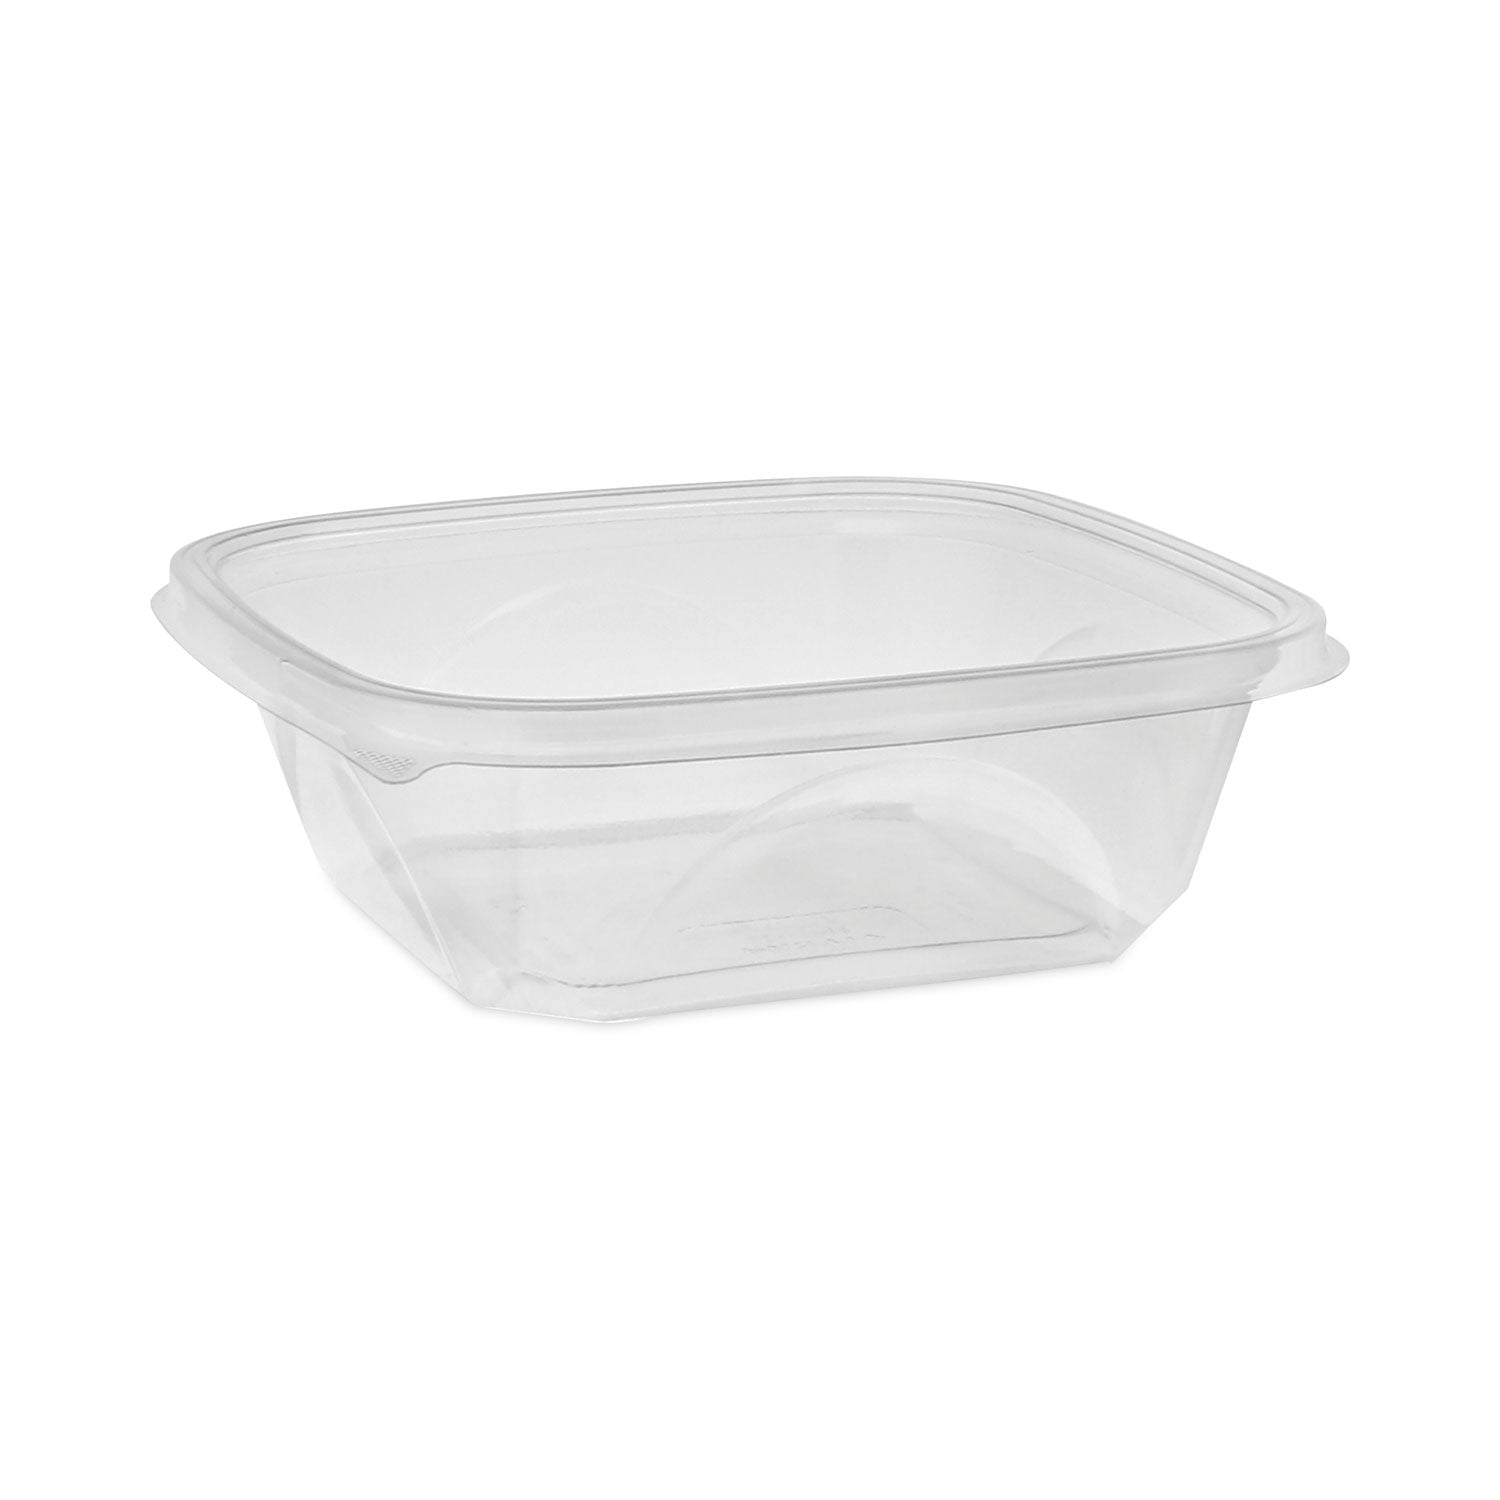 earthchoice-square-recycled-bowl-32-oz-7-x-7-x-2-clear-plastic-300-carton_pctsac0732 - 1